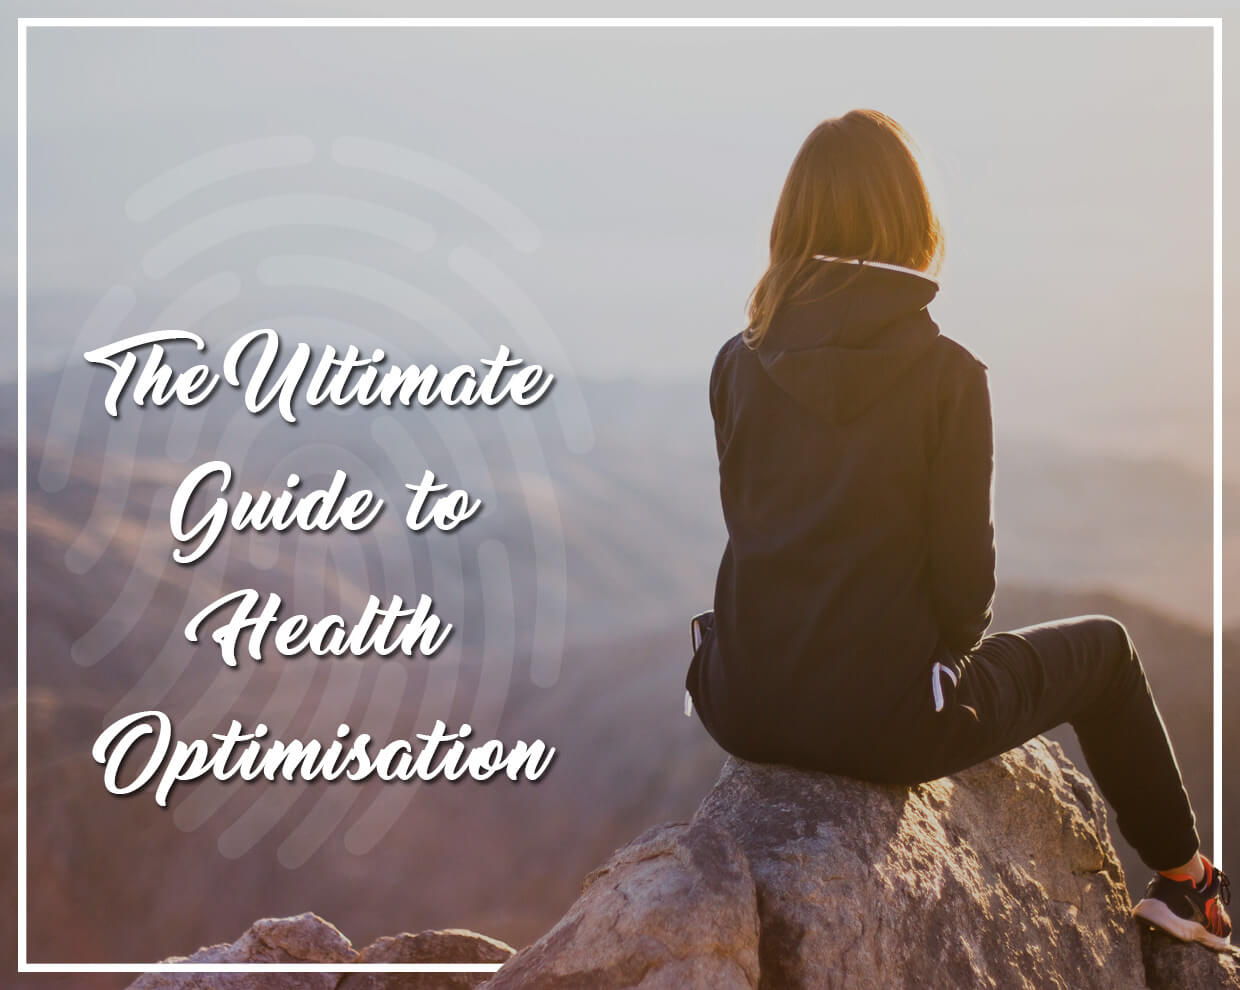 The Ultimate Guide to Health Optimisation